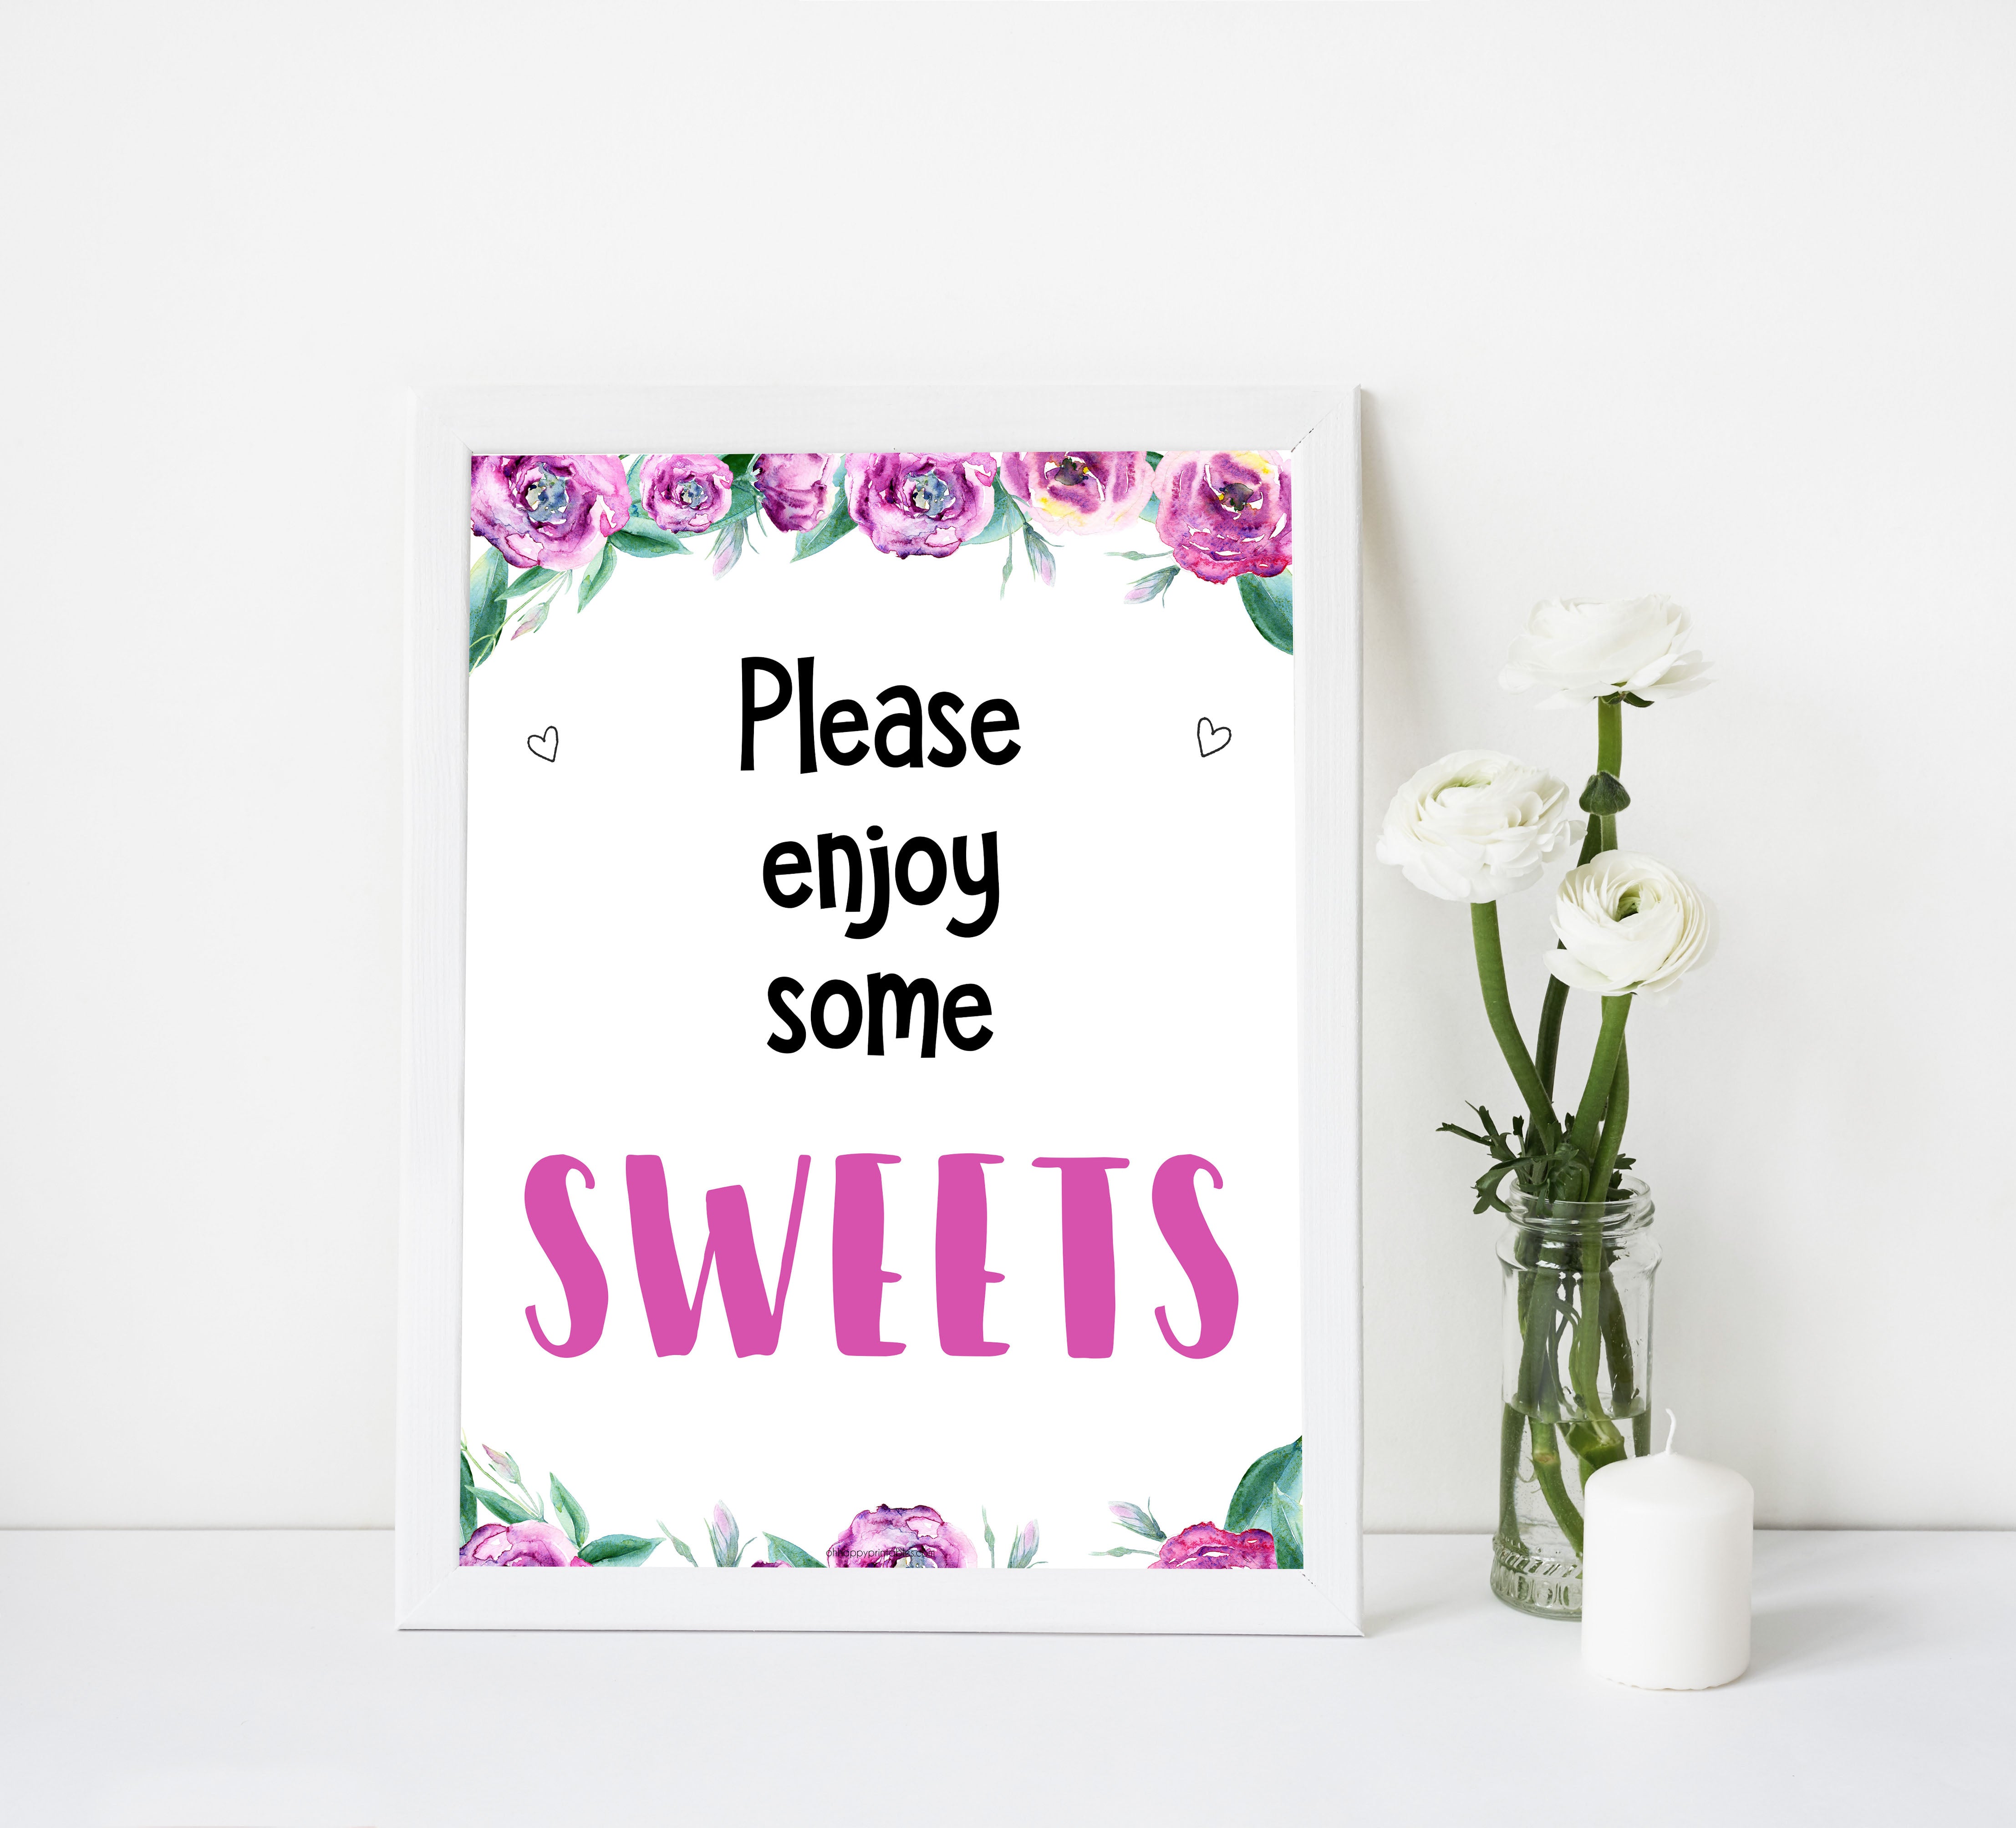 sweets baby shower decor, sweets baby signs, purple peonies baby signs, printable baby shower signs, fun baby shower ideas